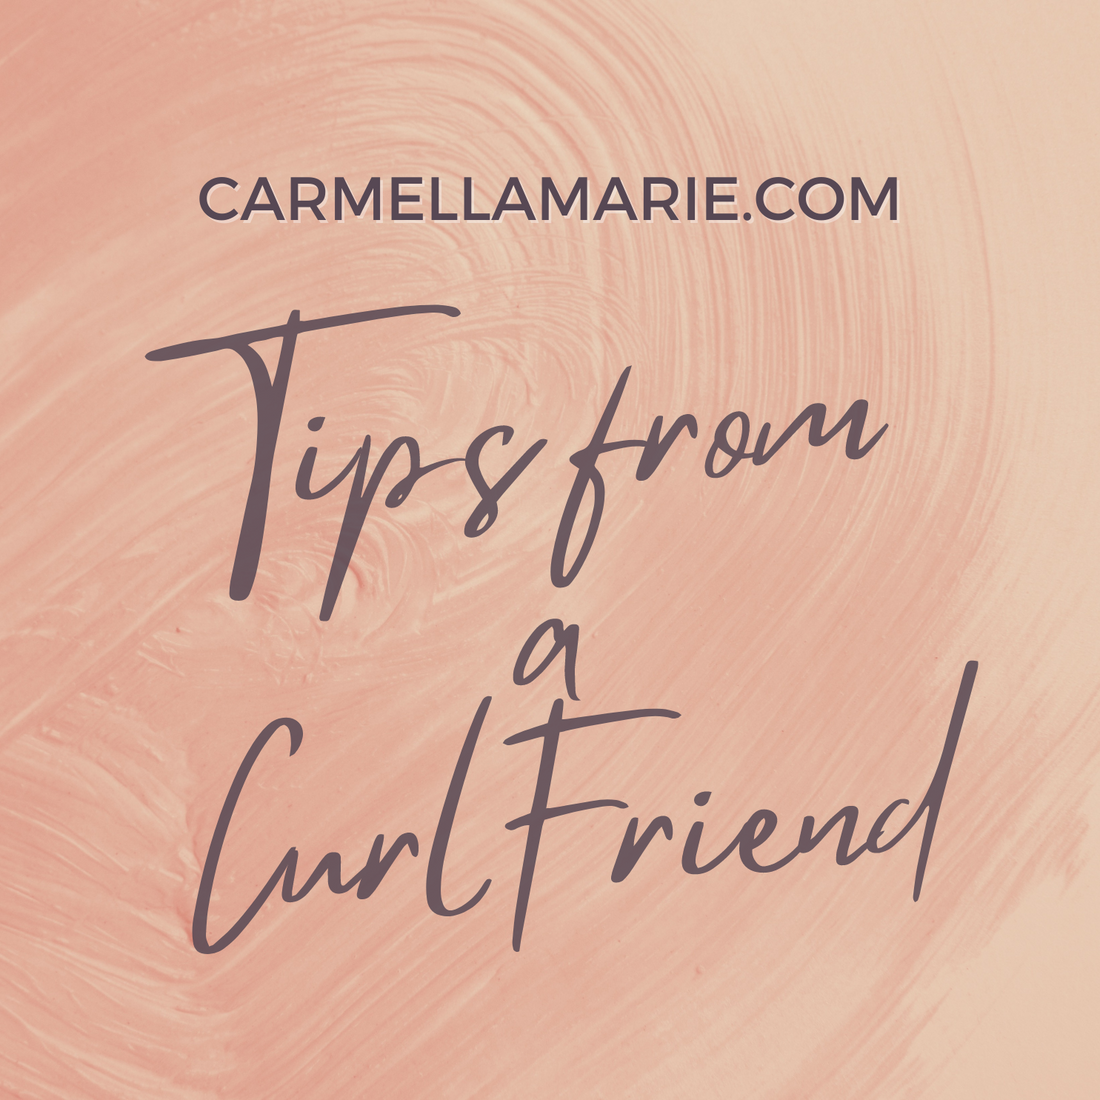 5 Tips from your favorite CurlFriend